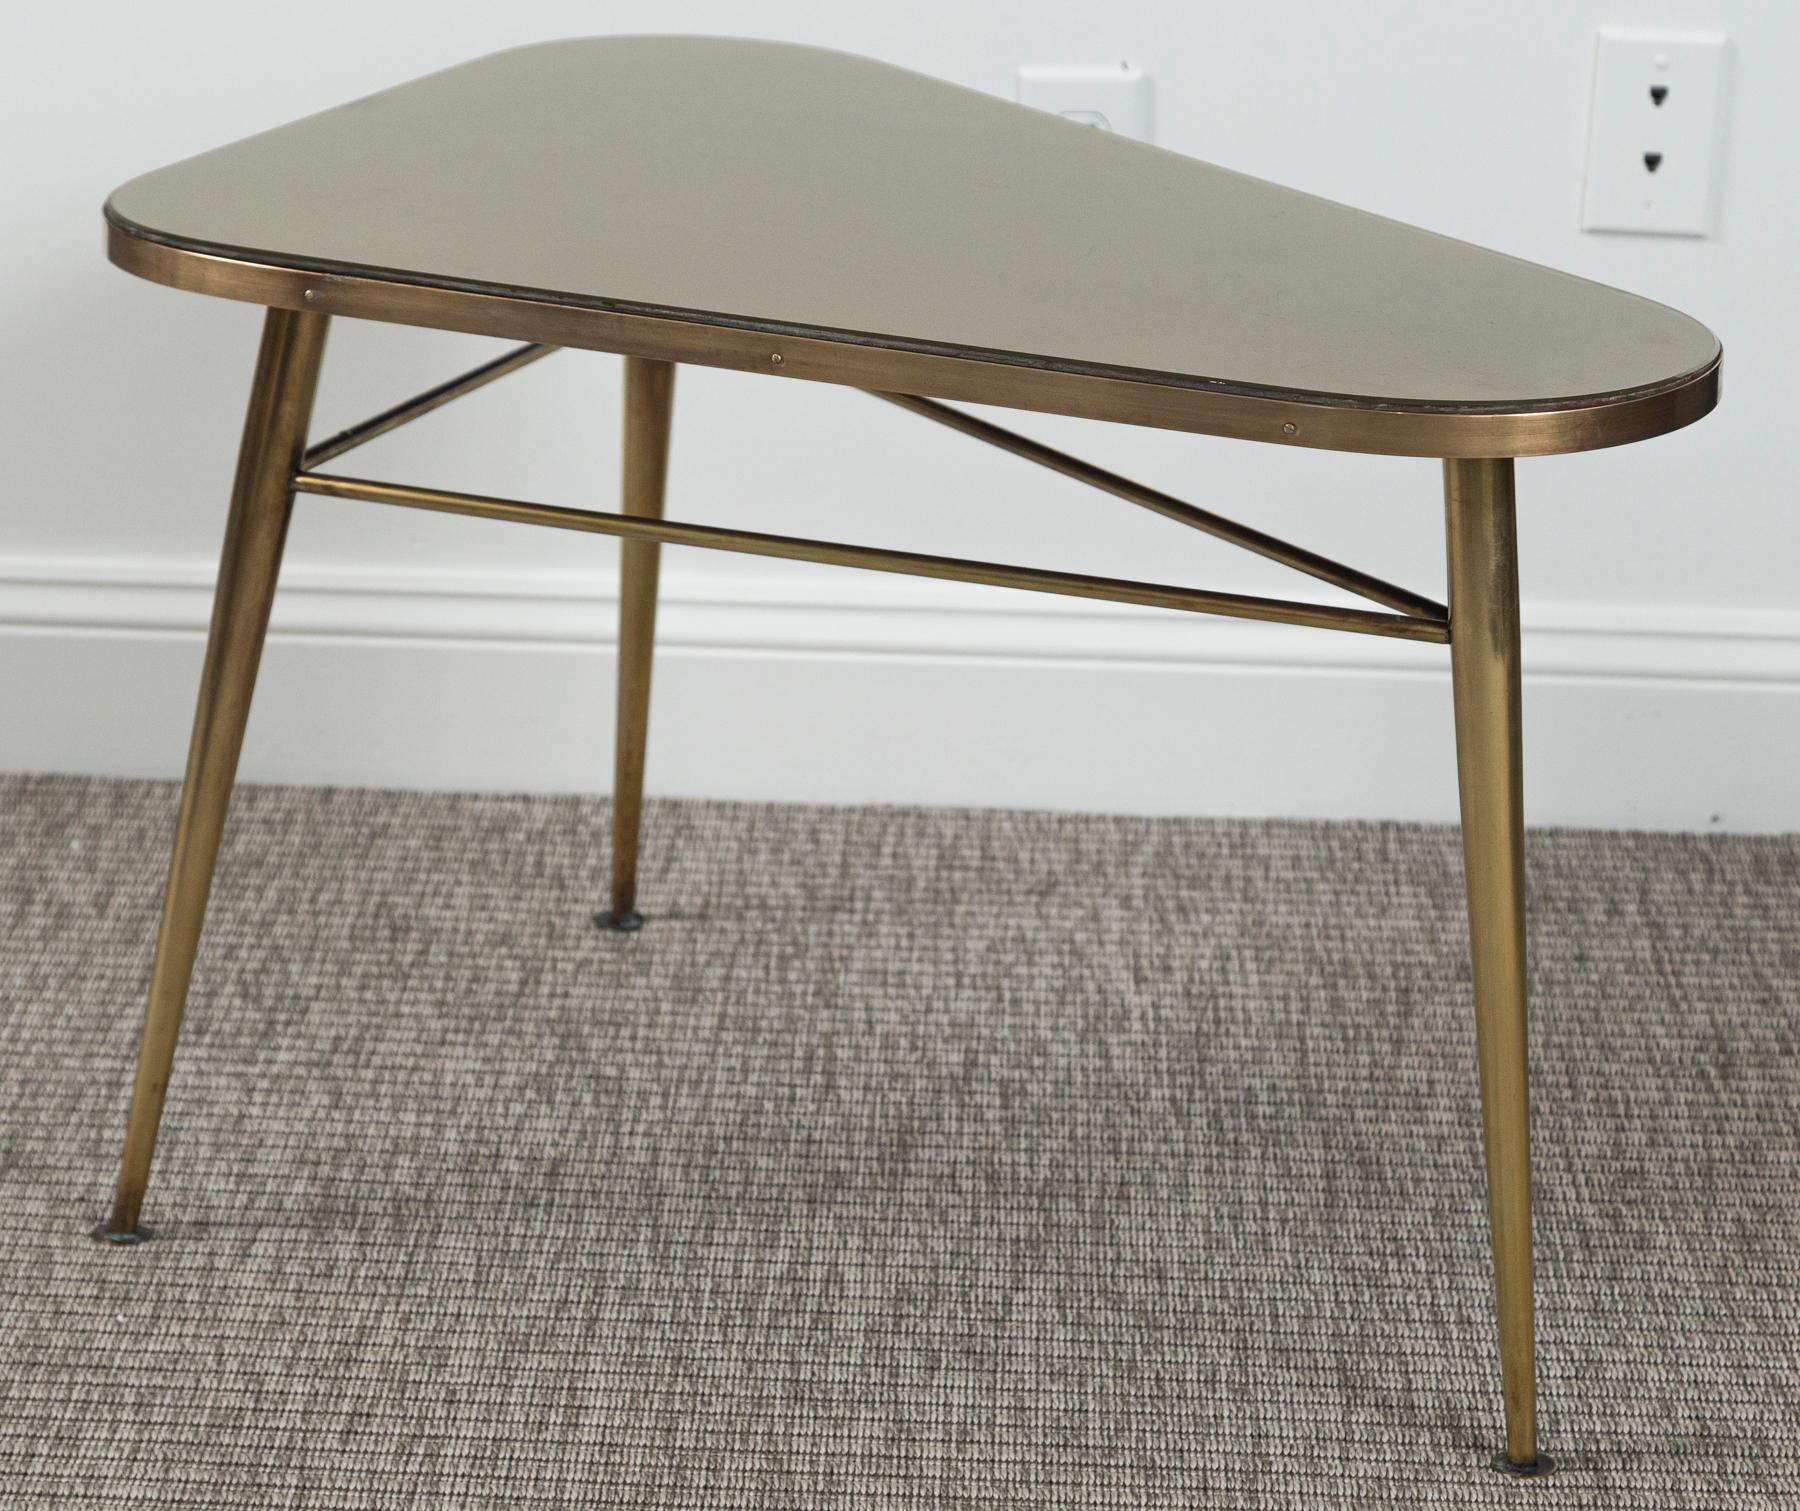 Wonderful Italian Design rounded right rectangular shaped table in solid unlacquered brass.  Table is shown with its original inset gold colored  glass top,. Brass table is joined with stretchers on three tapered and outstretched legs
Dating: